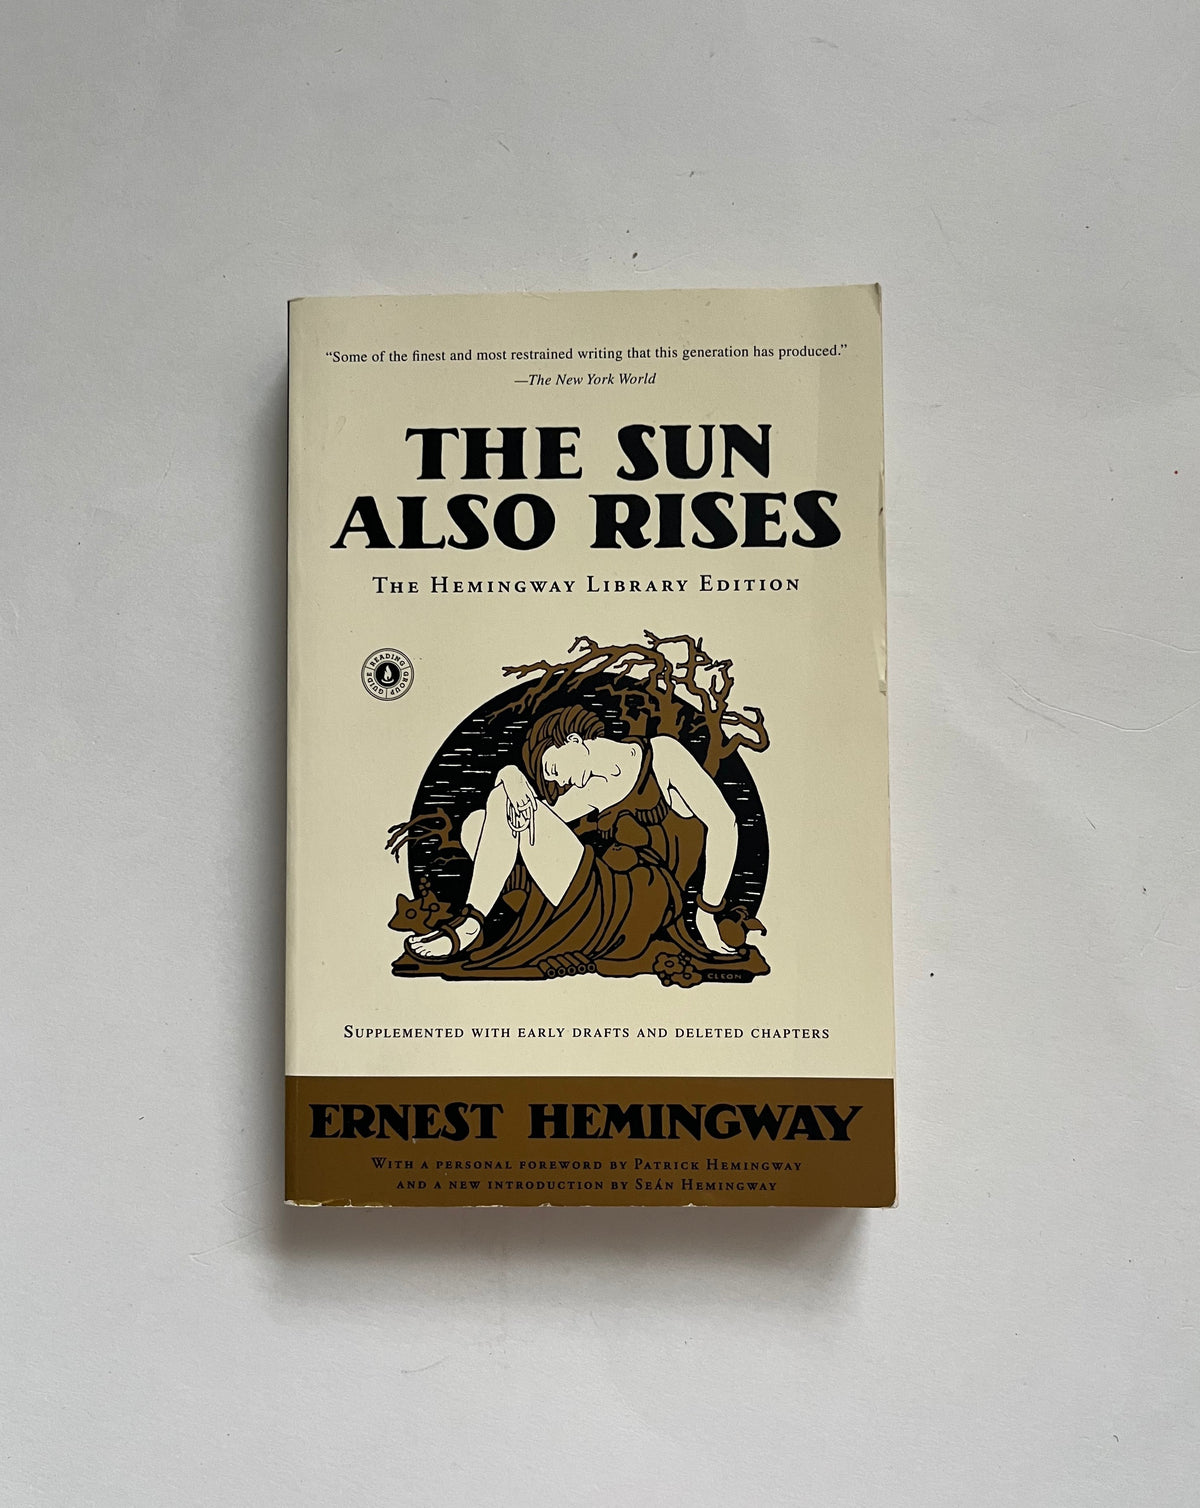 The Sun Also Rises by Earnest Hemingway